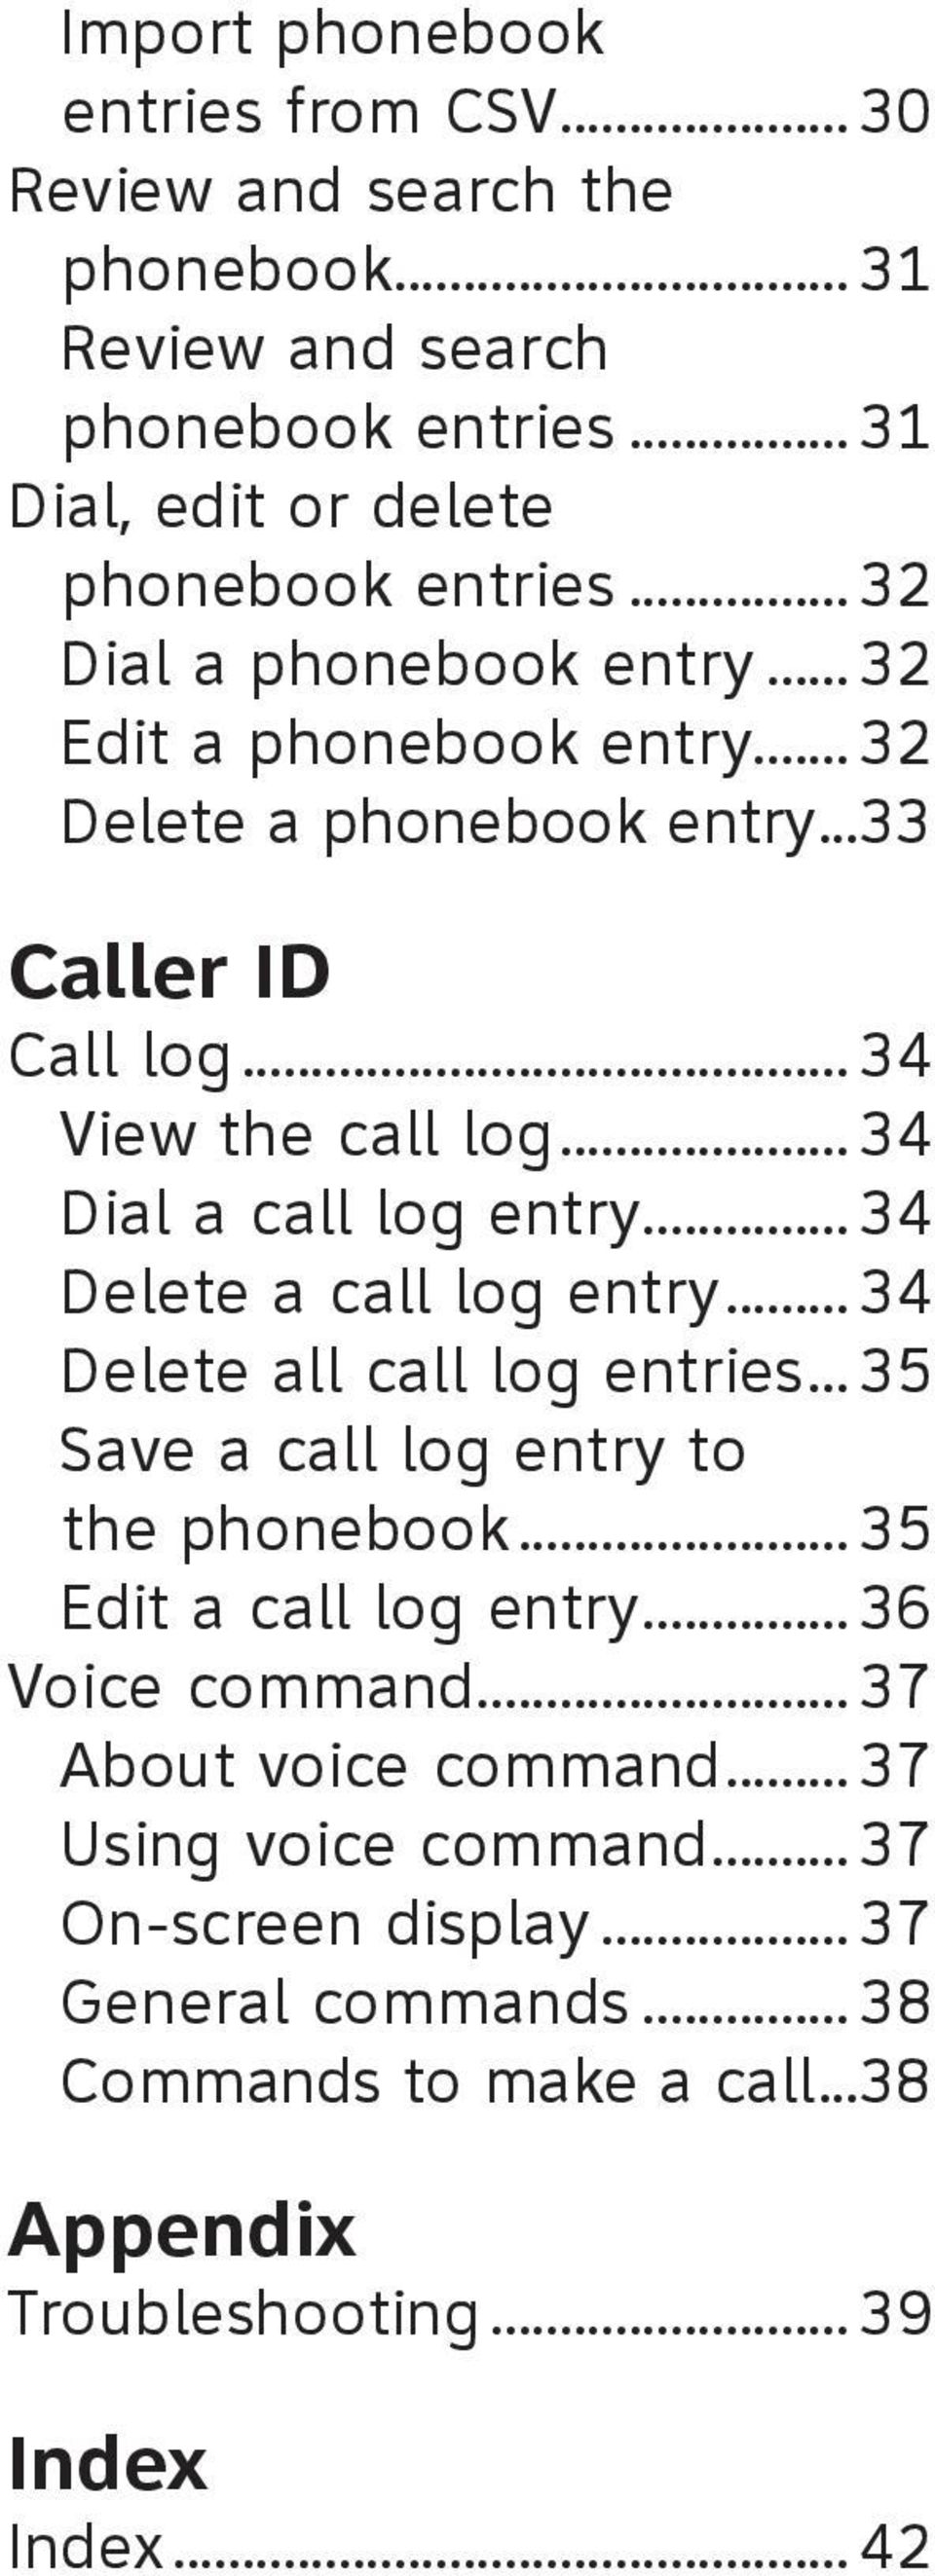 ..34 Delete all call log entries... 35 Save a call log entry to. the phonebook...35 Edit a call log entry...36 Voice command...37 About voice command.